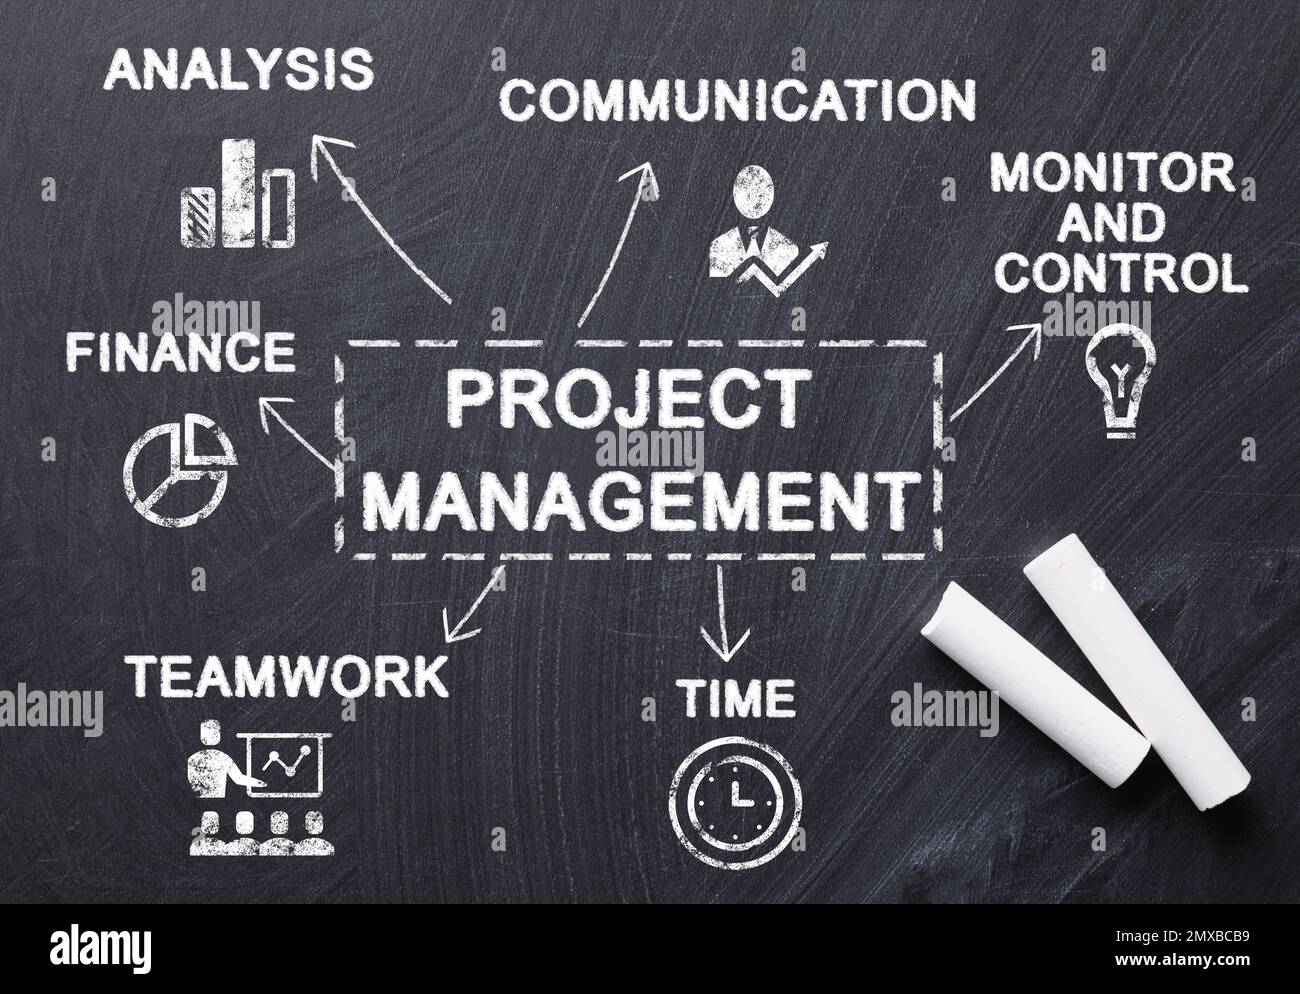 Pieces of white chalk on blackboard with project management scheme, top view Stock Photo